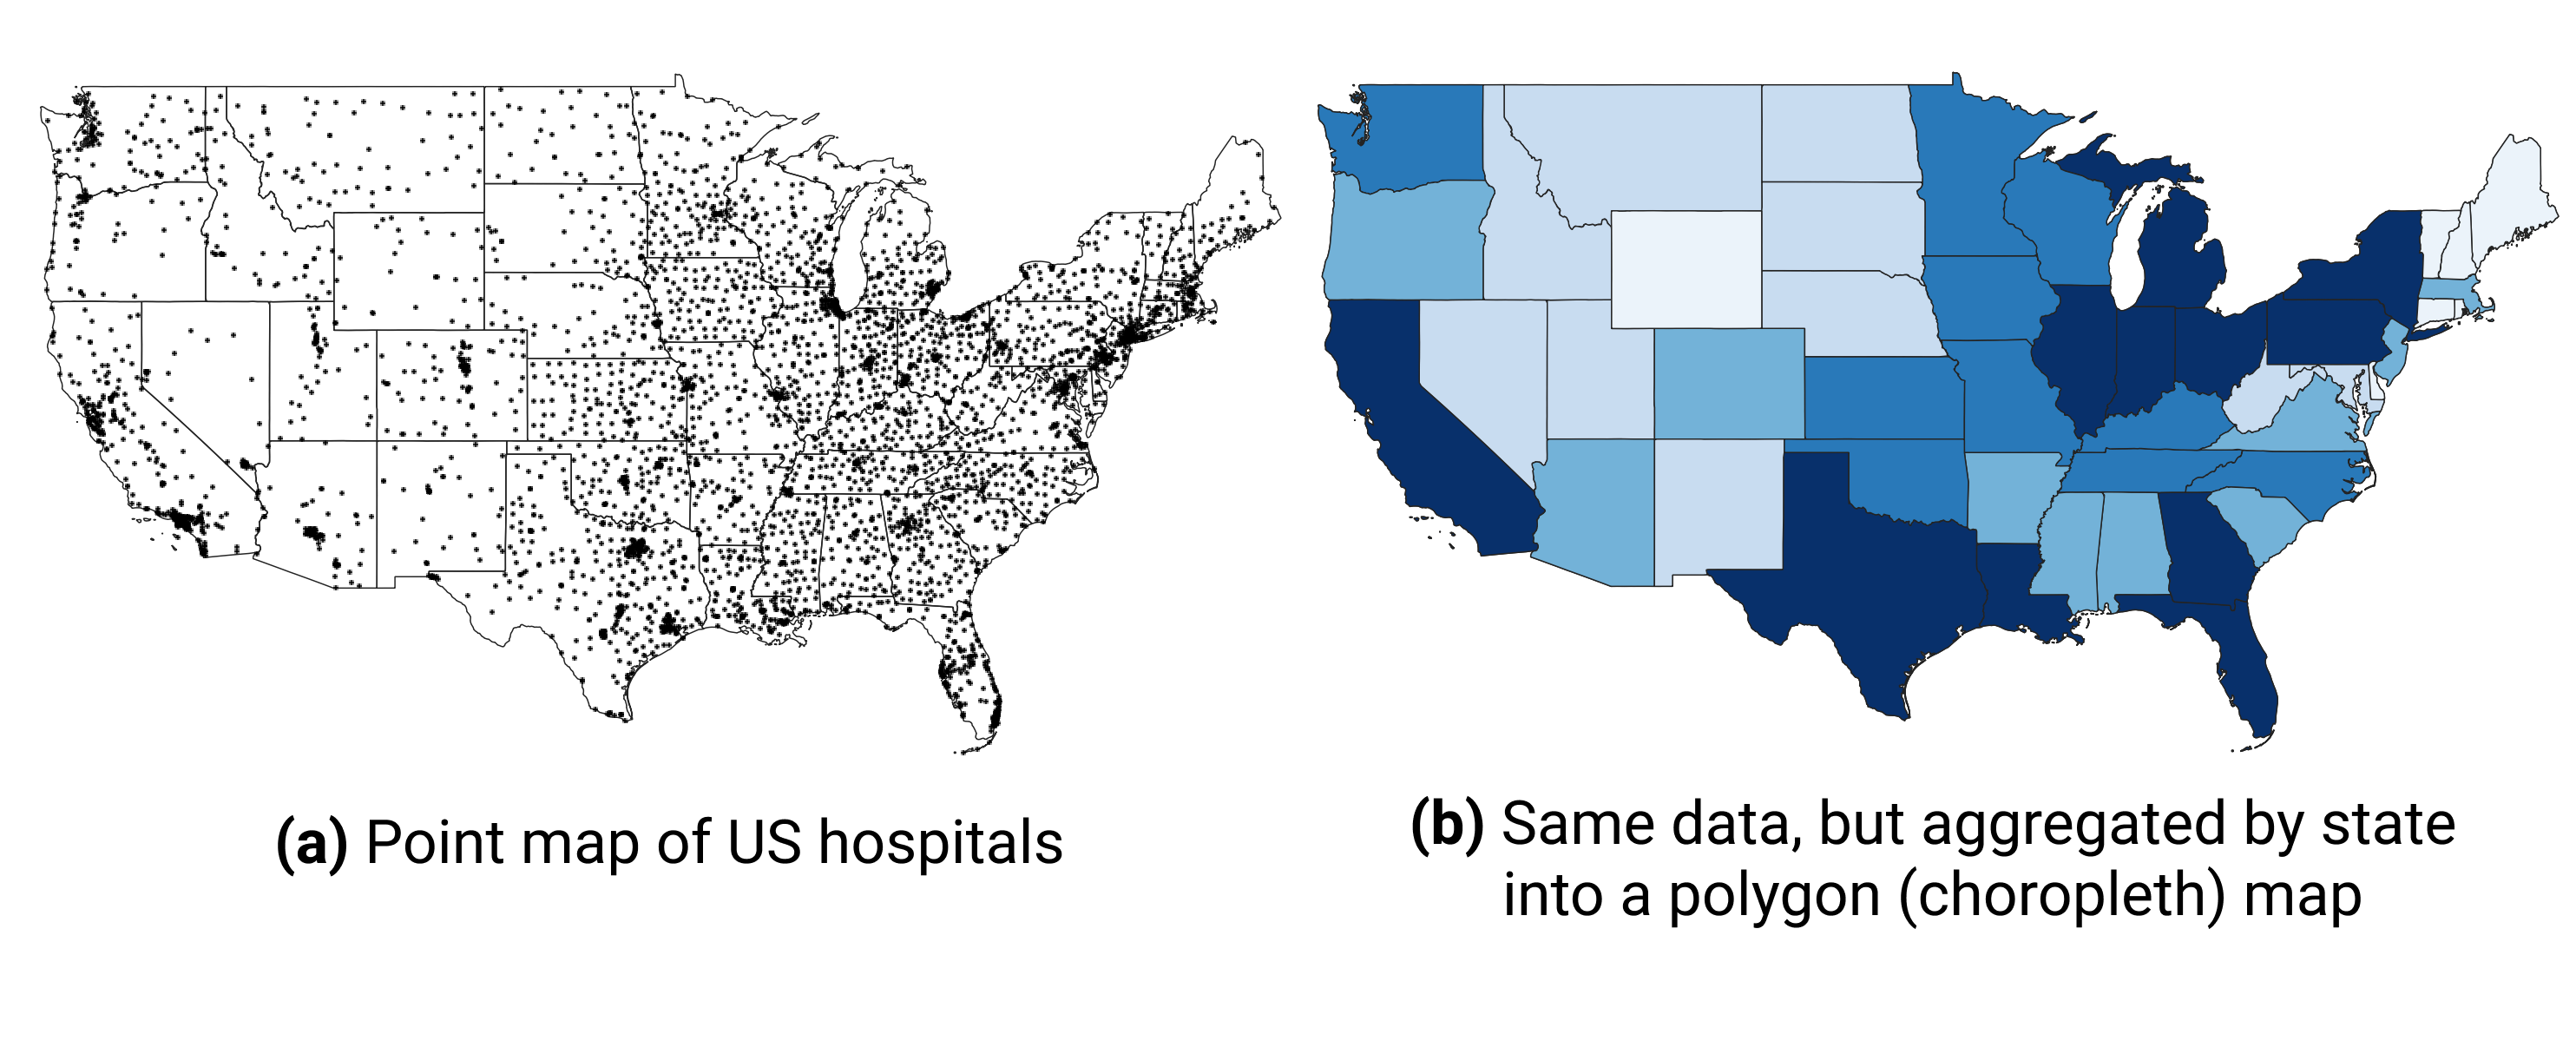 You can count addresses by state (or other area) to produce polygon, or choropleth, maps instead of point maps.